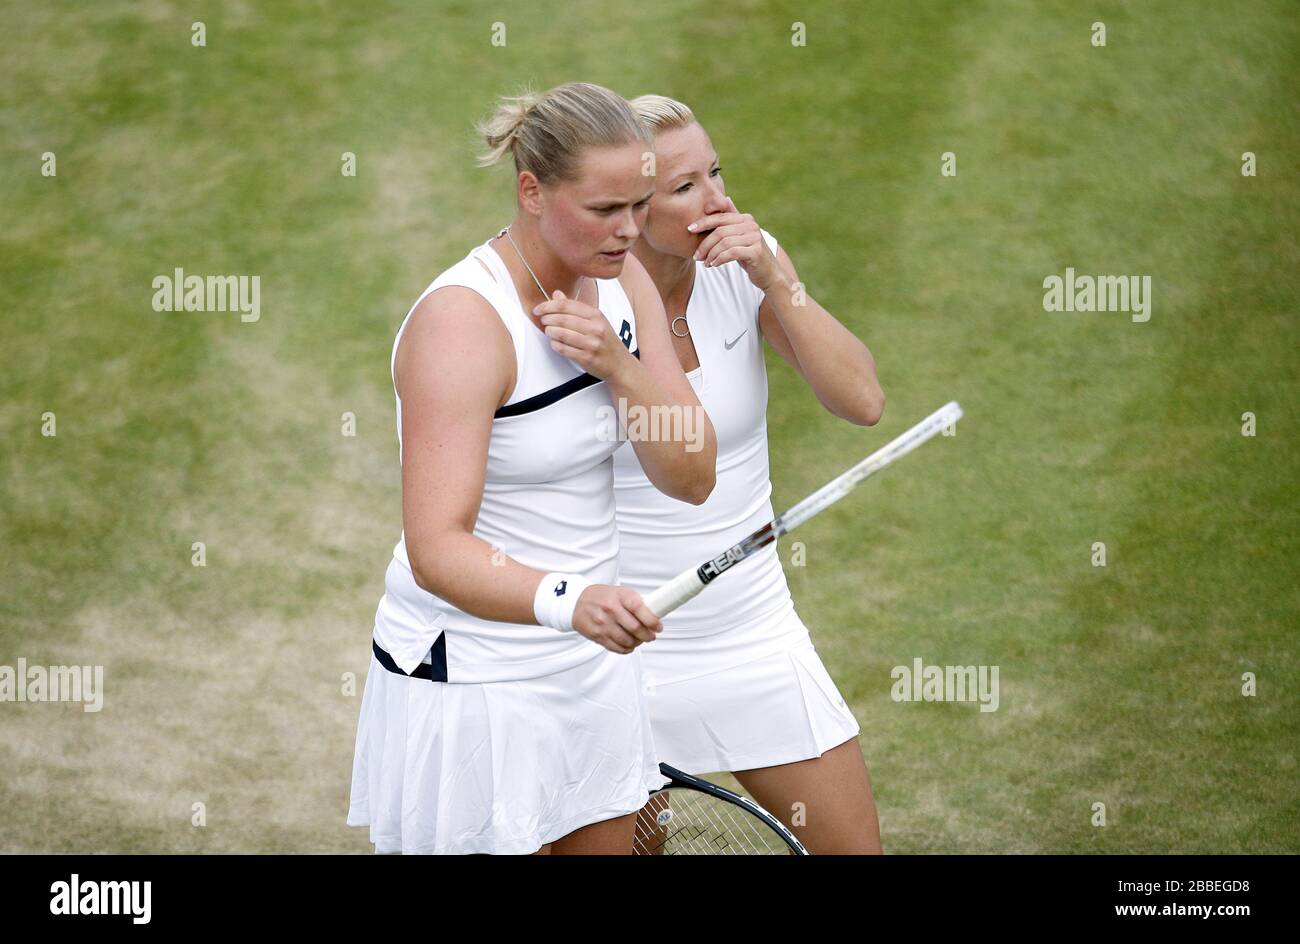 Germany's Anna-Lena Groenefeld (left) and Czech Republic's Kveta Peschke react in their women's doubles match against Great Britain's Laura Robson and USA's Lisa Raymond during day six of the Wimbledon Championships at The All England Lawn Tennis and Croquet Club, Wimbledon. Stock Photo